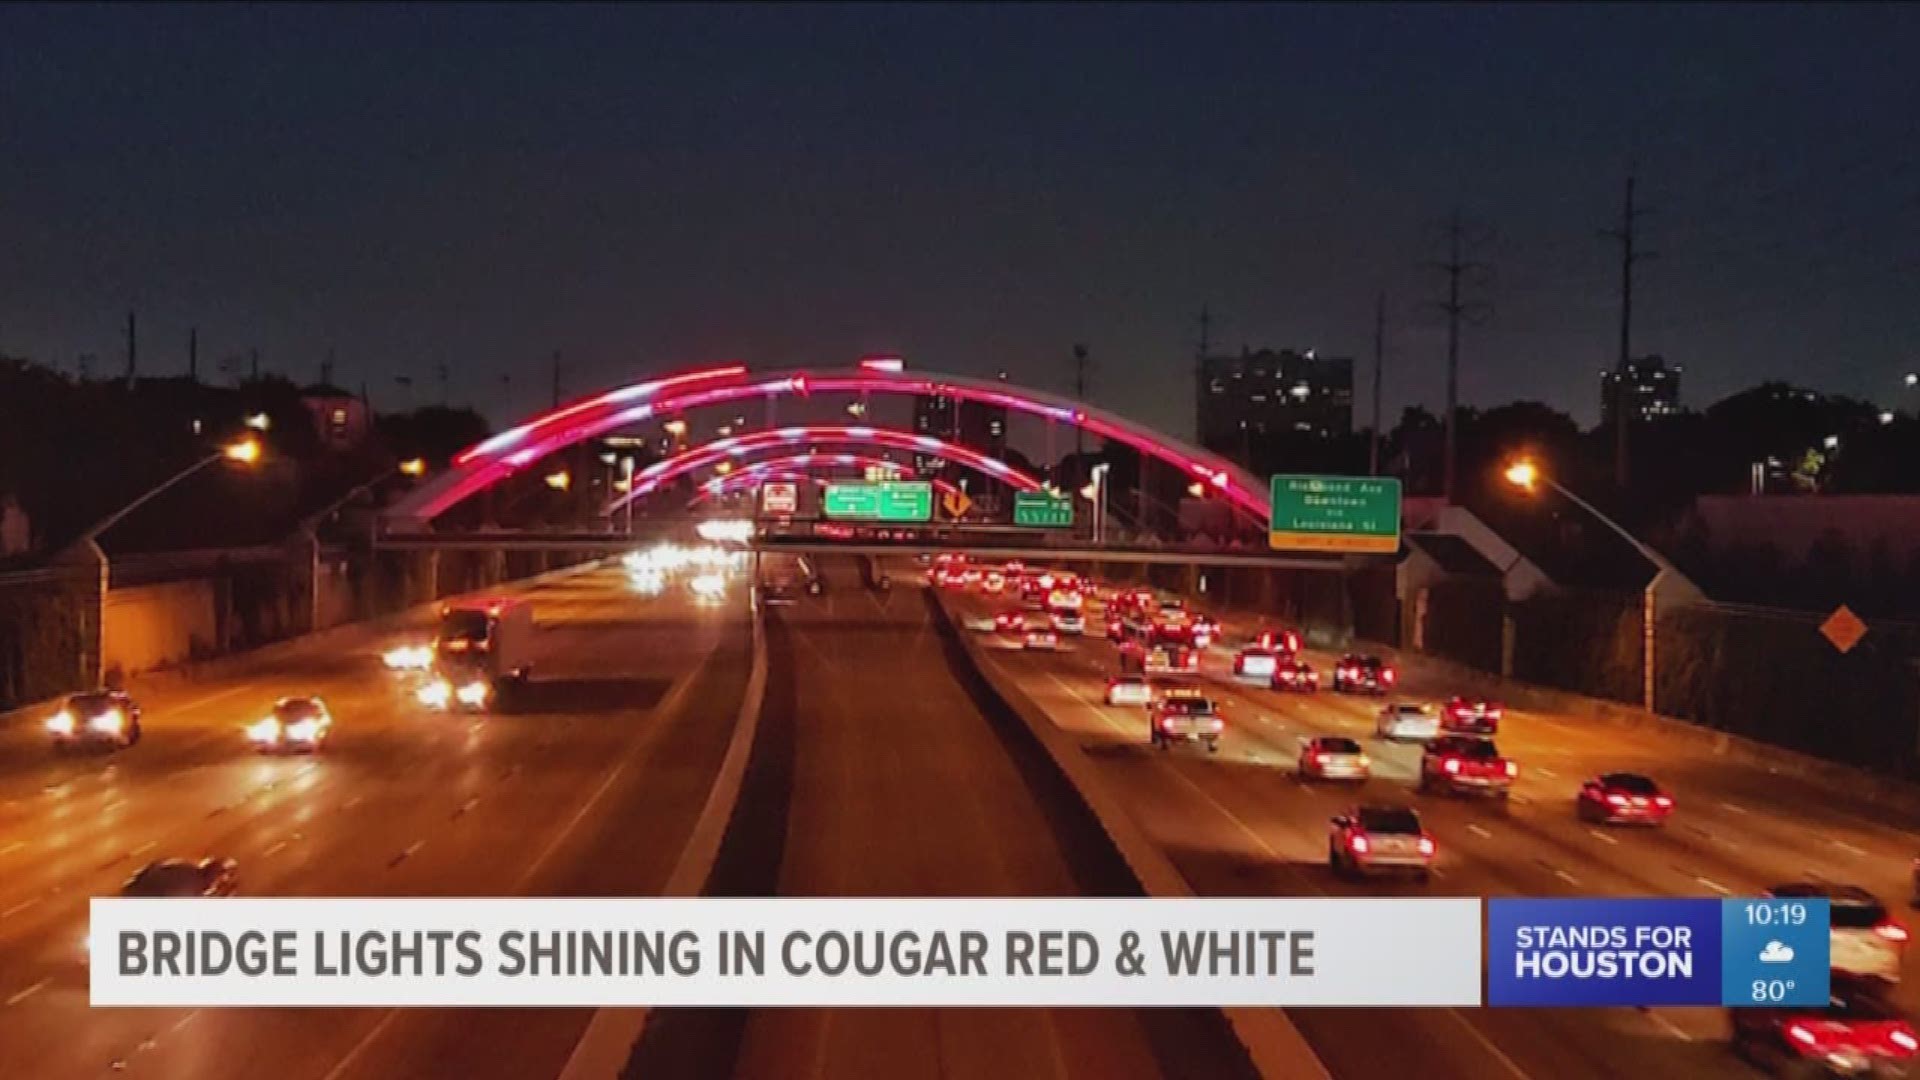 The bridges over Highway 59 shined in red and white before Houston's game against Arizona Saturday.